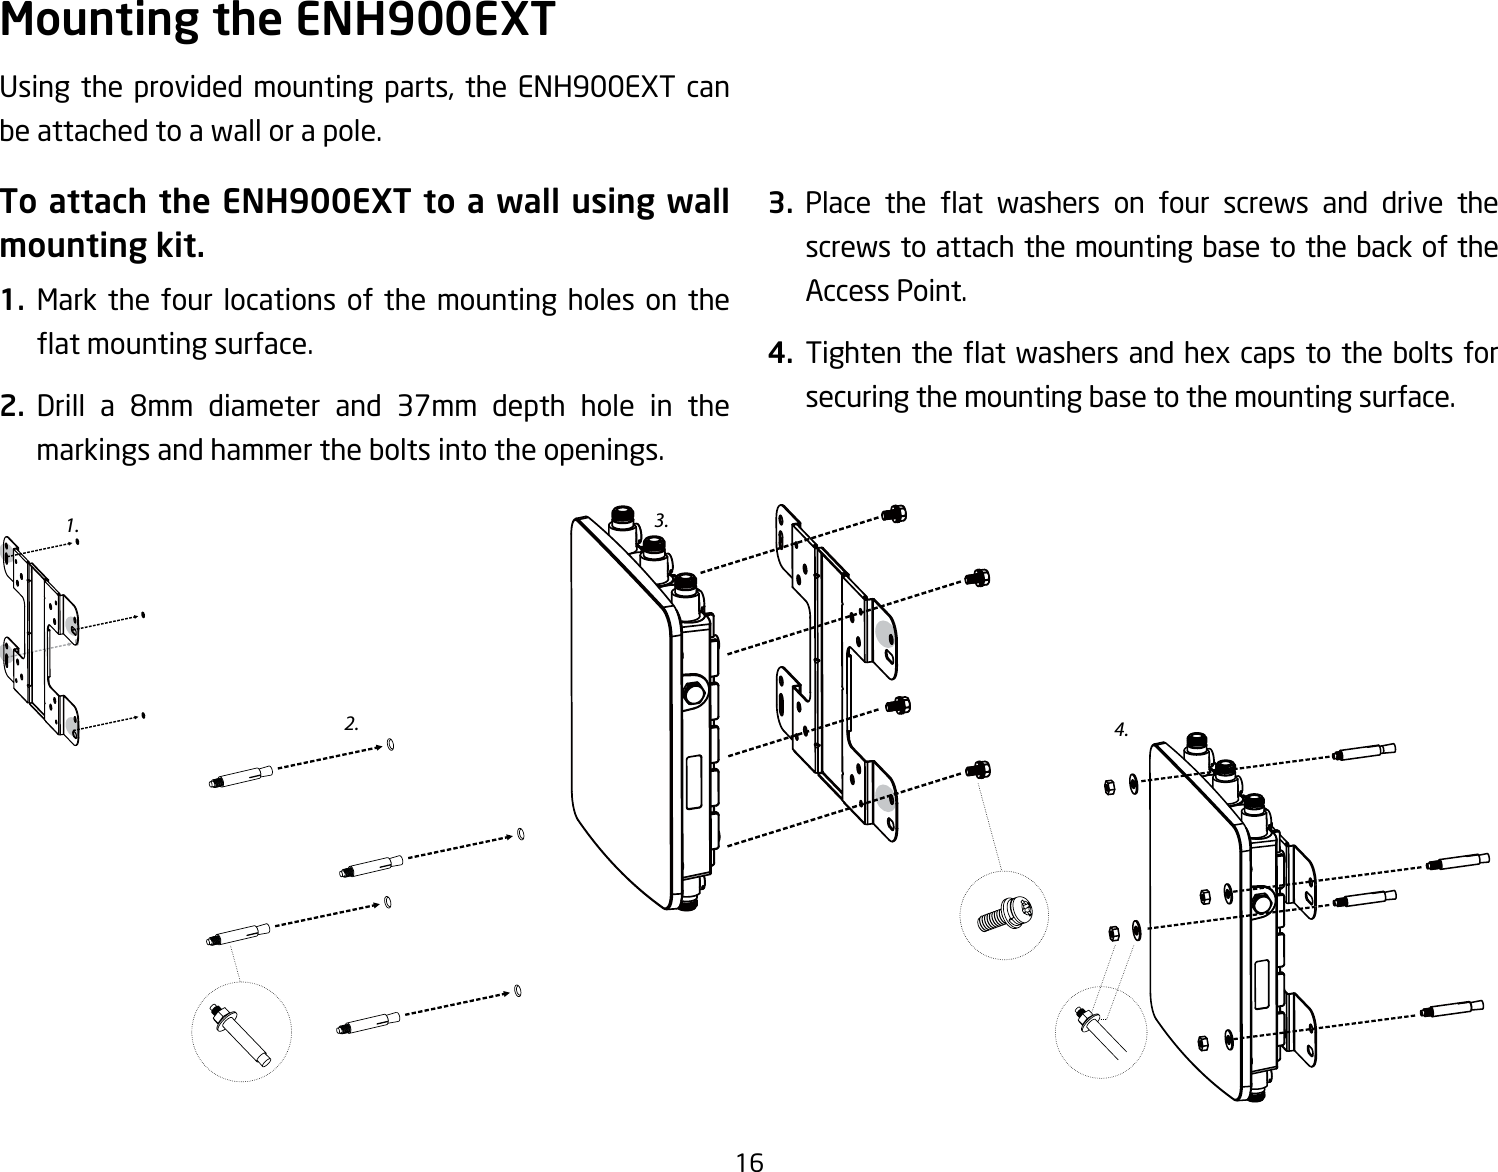 16Usingthe provided mountingparts, theENH900EXT canbe attached to a wall or a pole.To attach the ENH900EXT to a wall using wall mounting kit.1.  Mark the four locations of the mounting holes on the atmountingsurface.2. Drill a 8mm diameter and 37mm depth hole in themarkings and hammer the bolts into the openings.3. Place the at washers on four screws and drive thescrews to attach the mounting base to the back of the Access Point.4. Tightentheat washersandhexcaps to theboltsforsecuring the mounting base to the mounting surface.Mounting the ENH900EXT2.3.4.1.